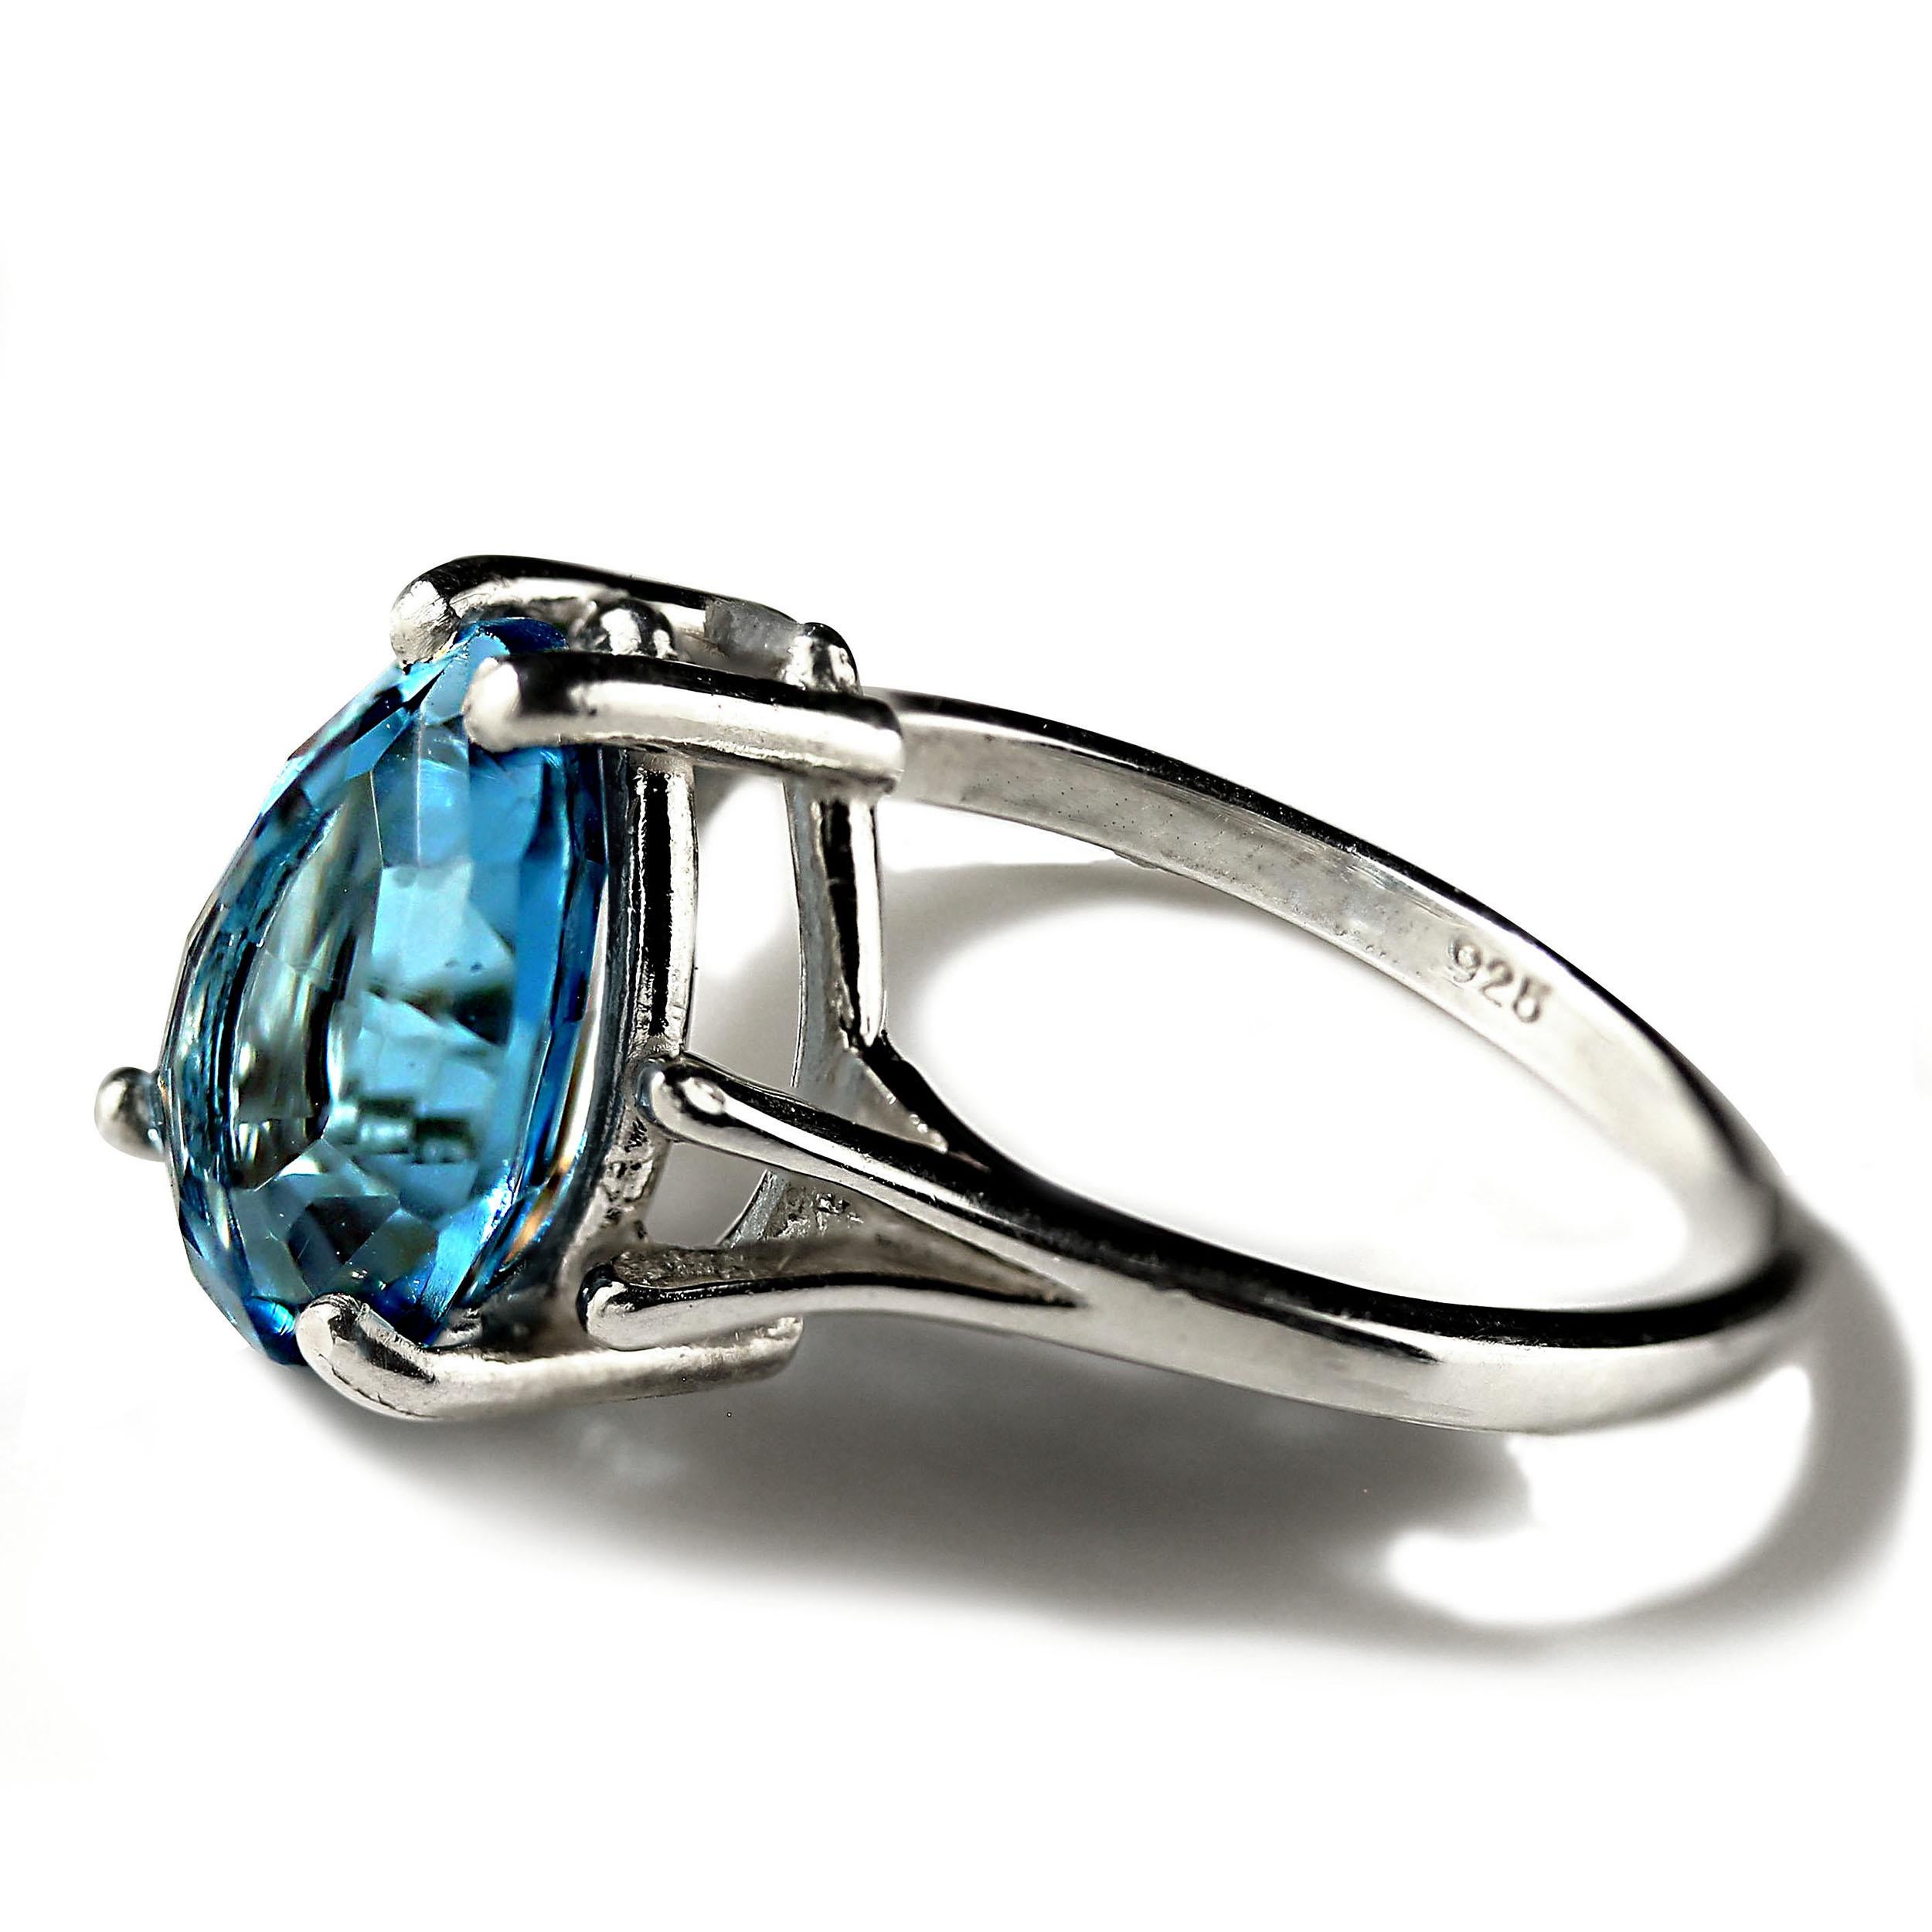 Artisan AJD Pear Shape Blue Topaz in Sterling Silver Cocktail Ring